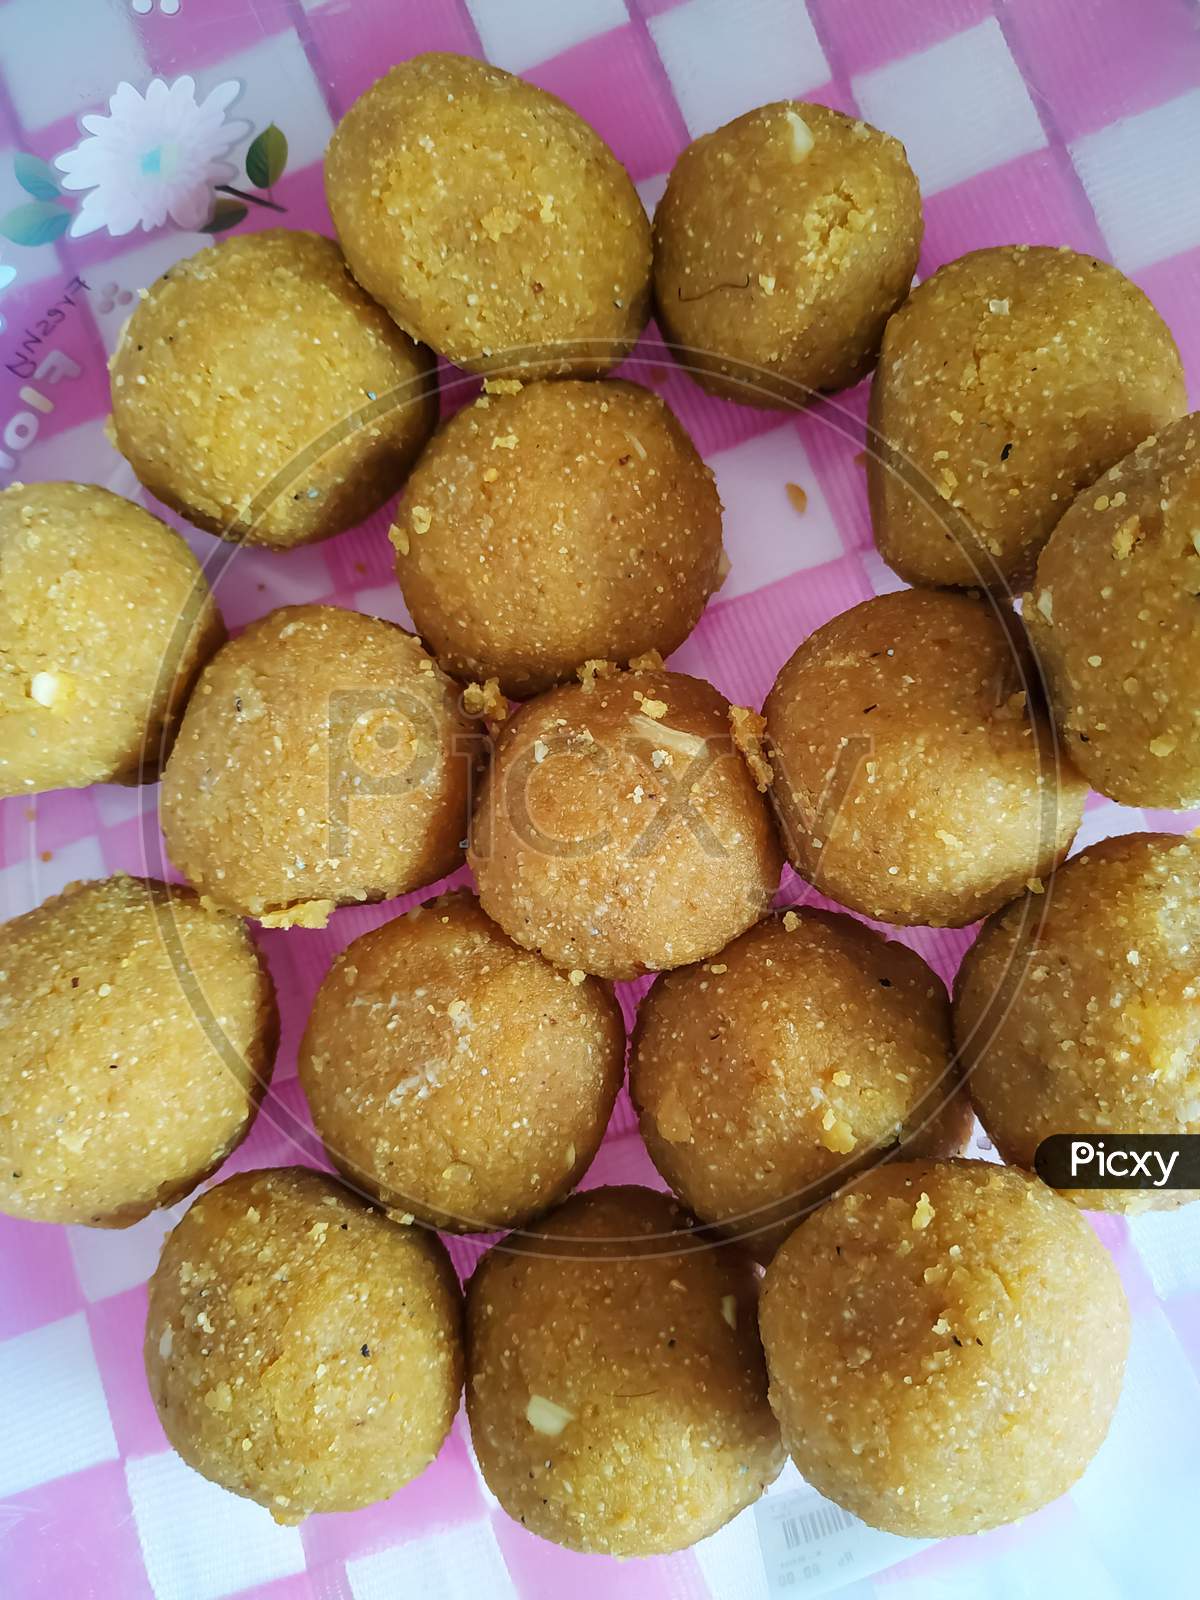 Traditional indian sweet food,Besan Ladoos dry fruits, Indian cultural Sweets Laddu